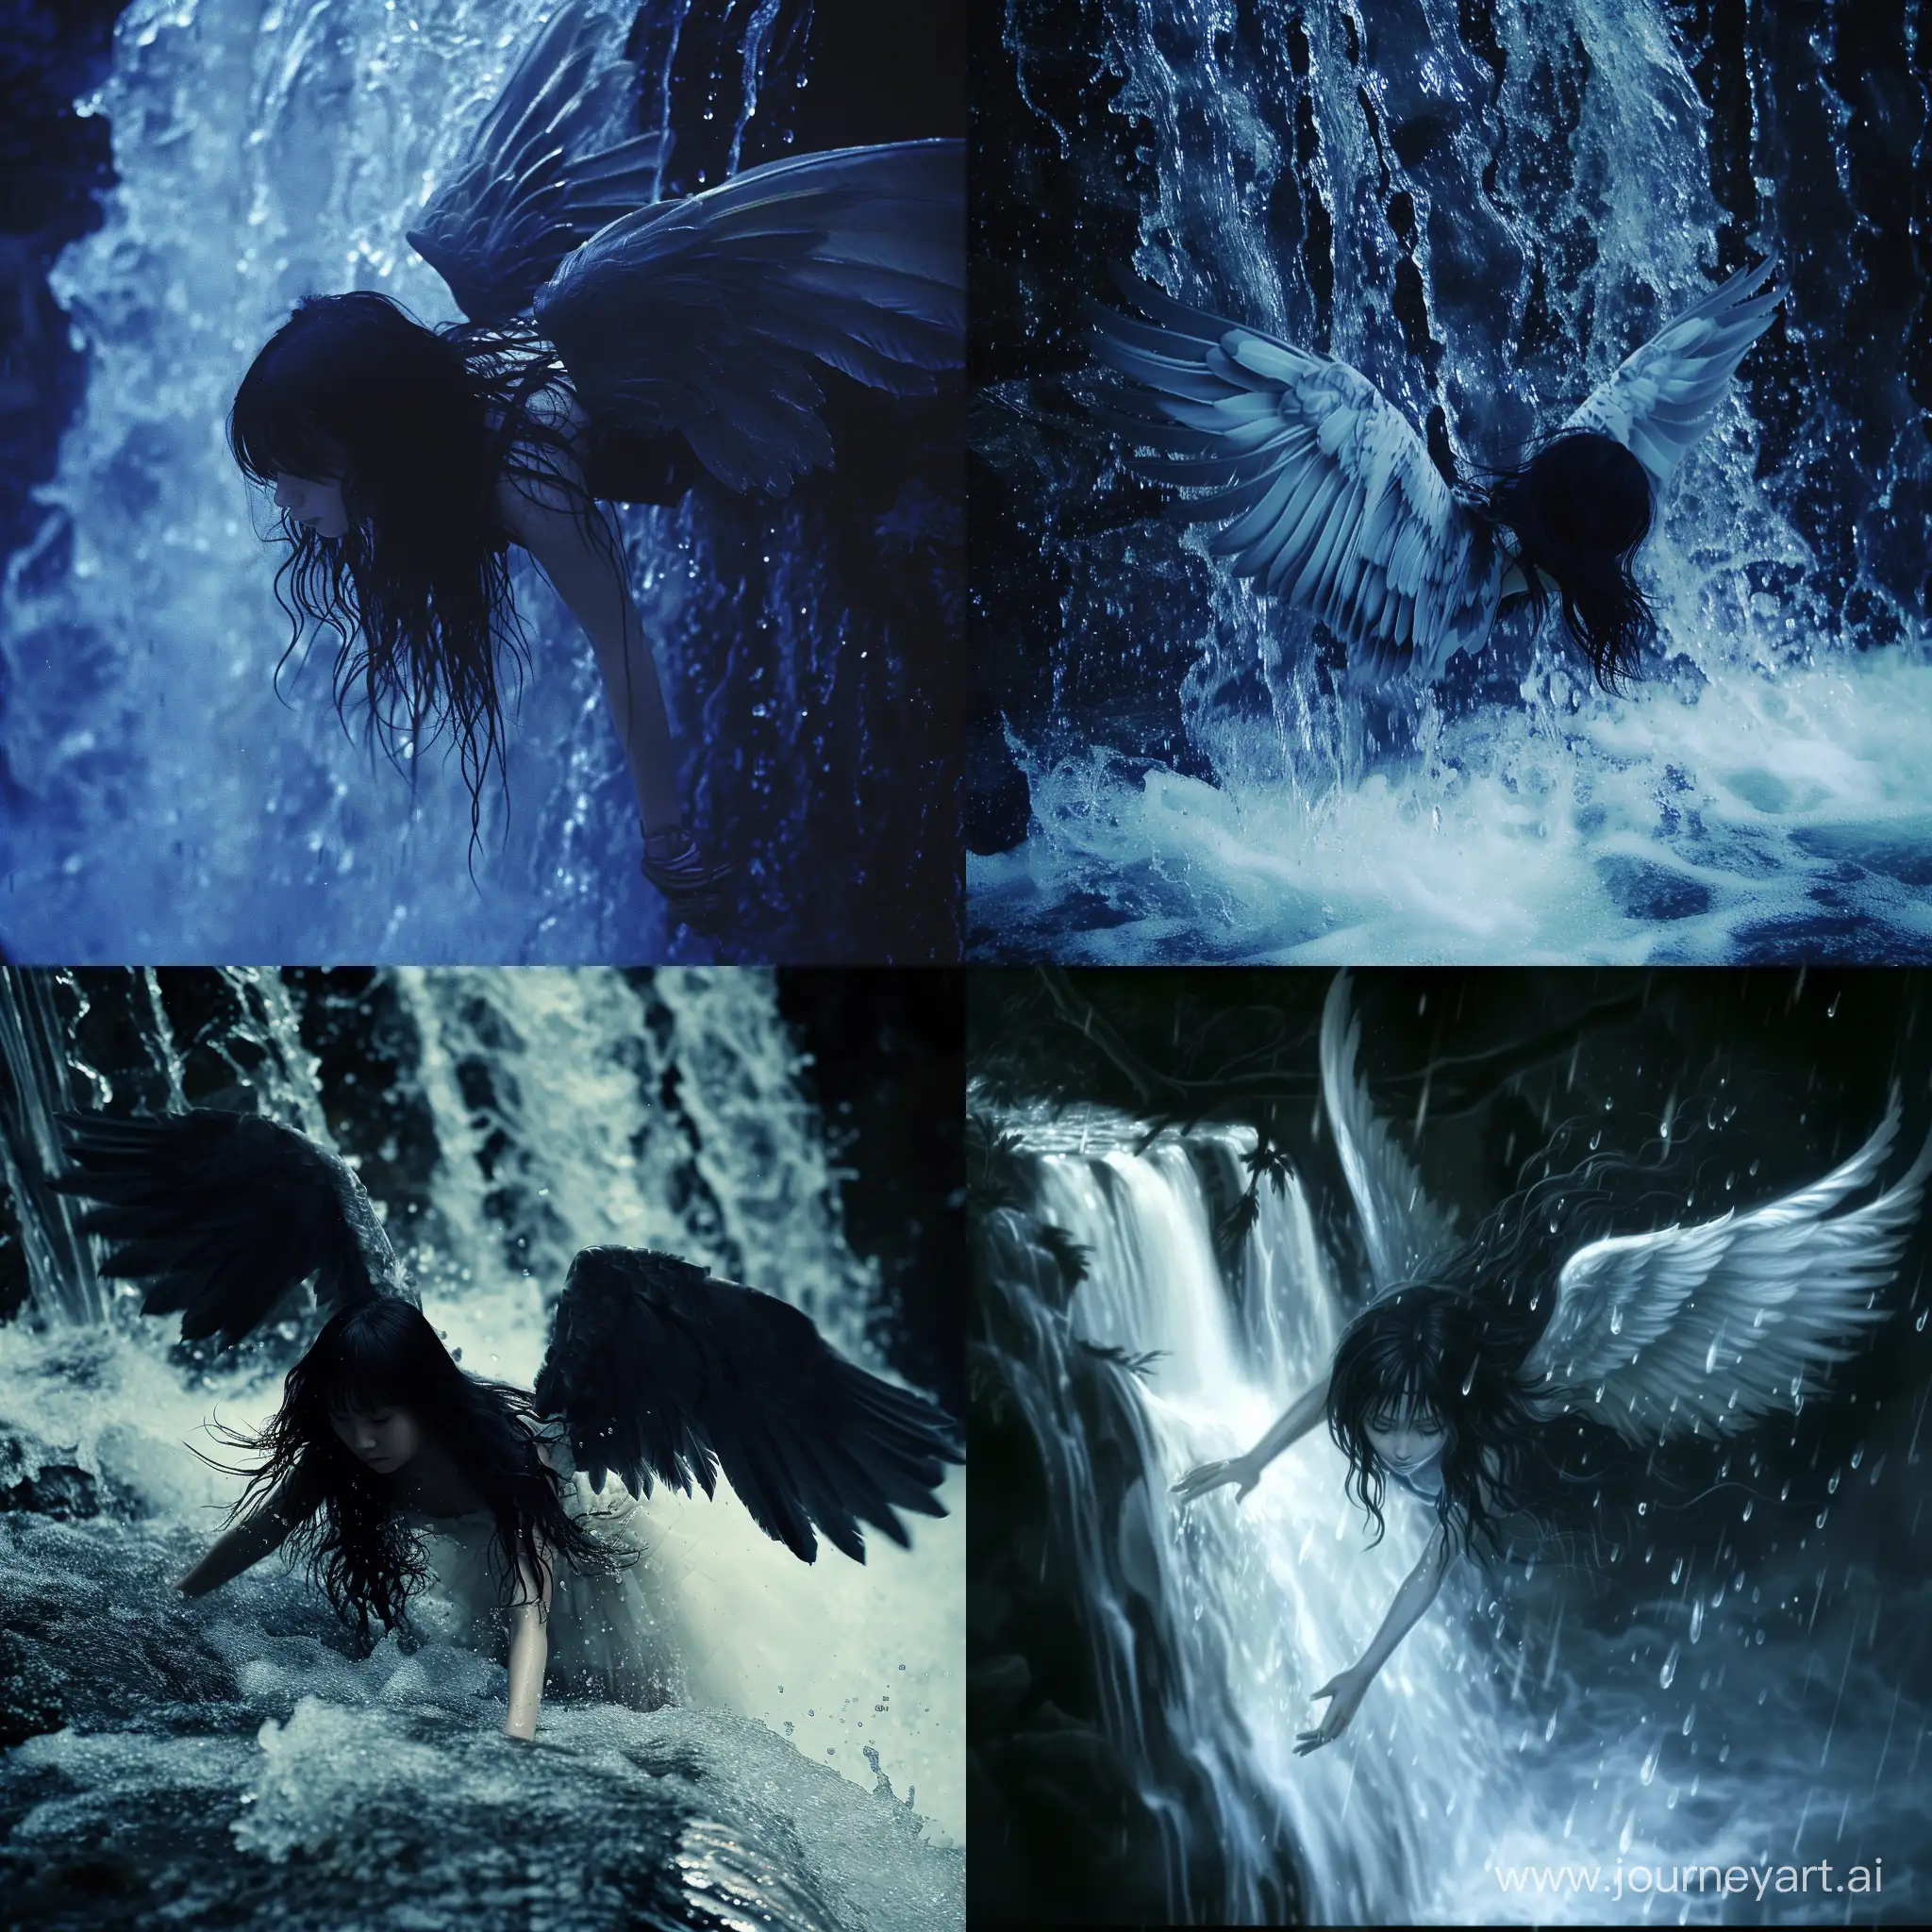 Mystical-Night-BlackHaired-Winged-Girl-Falling-from-Waterfall